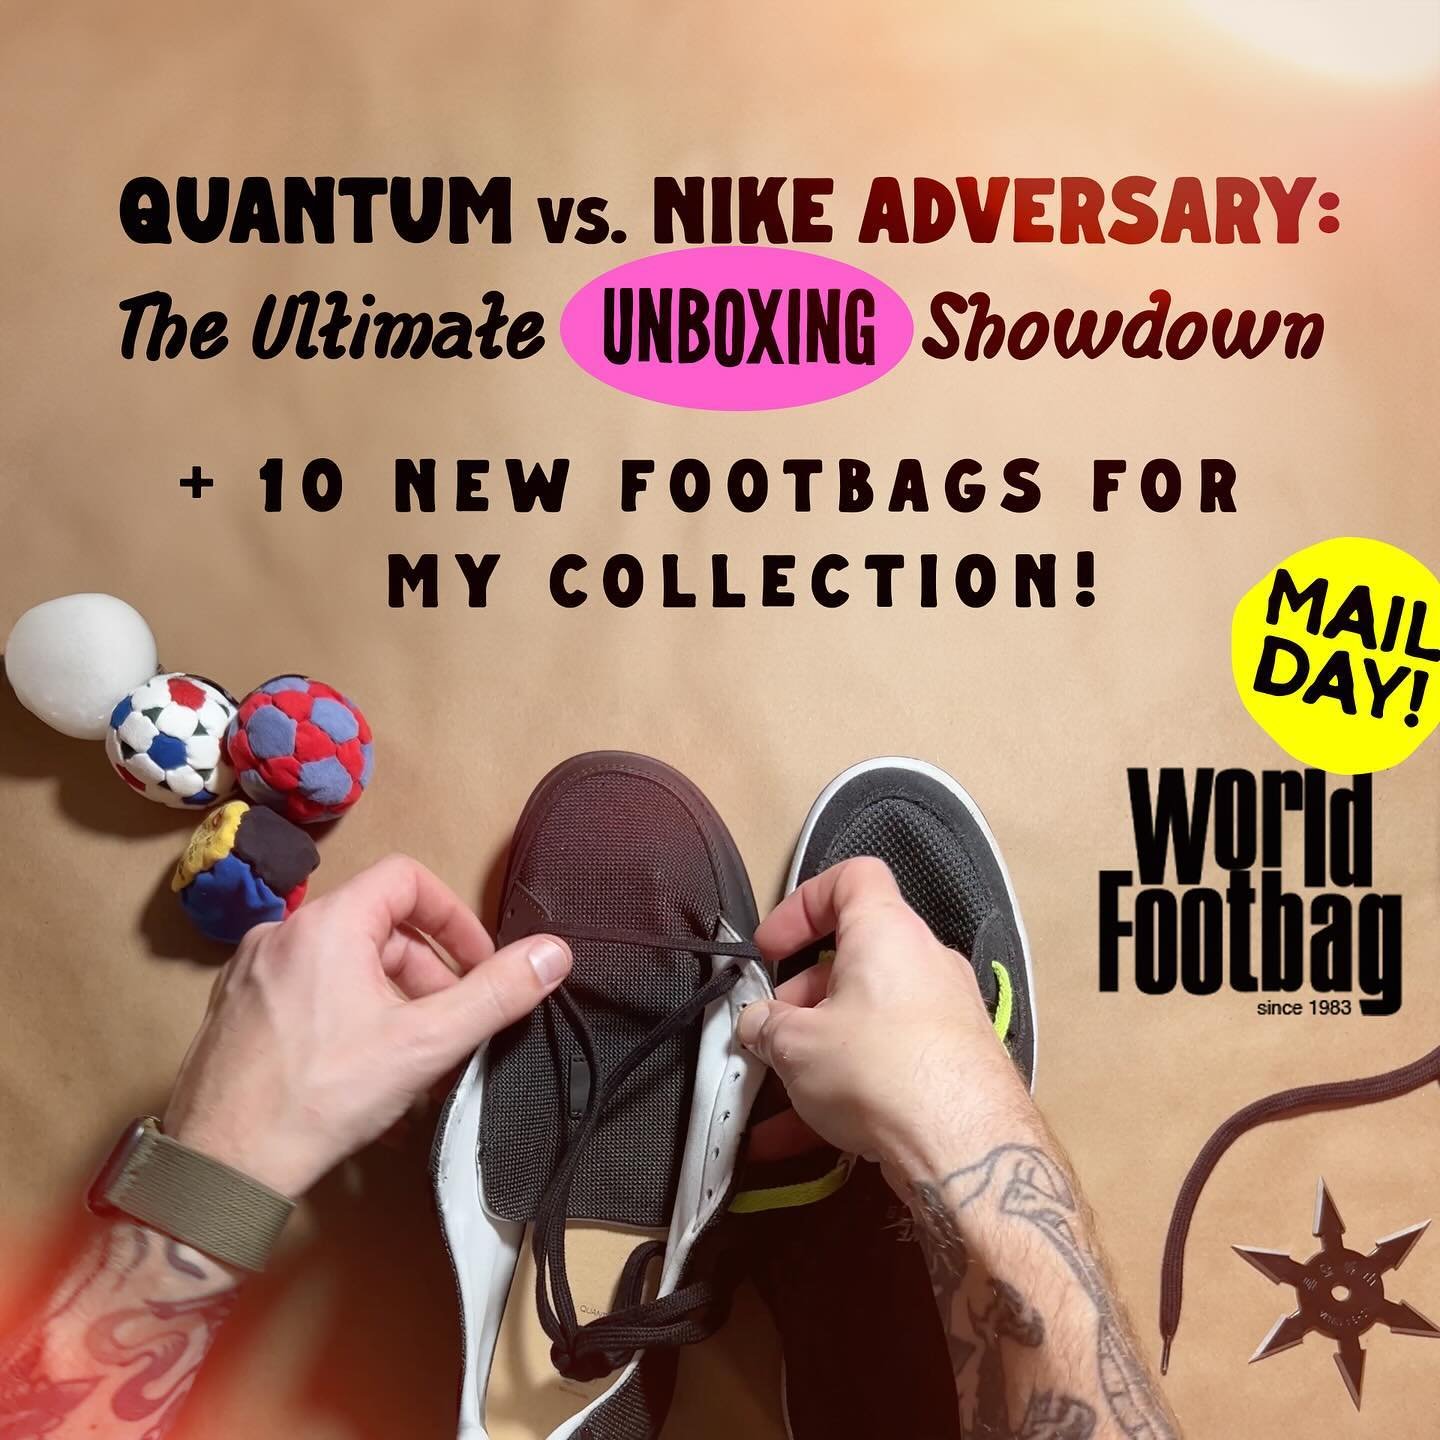 New Youtube video!! Get ready for an epic showdown as we unbox and compare two top contenders in the world of footbag shoes: the Quantum and the Nike Adversary! Side by side to show you up close the features, and style of these renowned models. But t